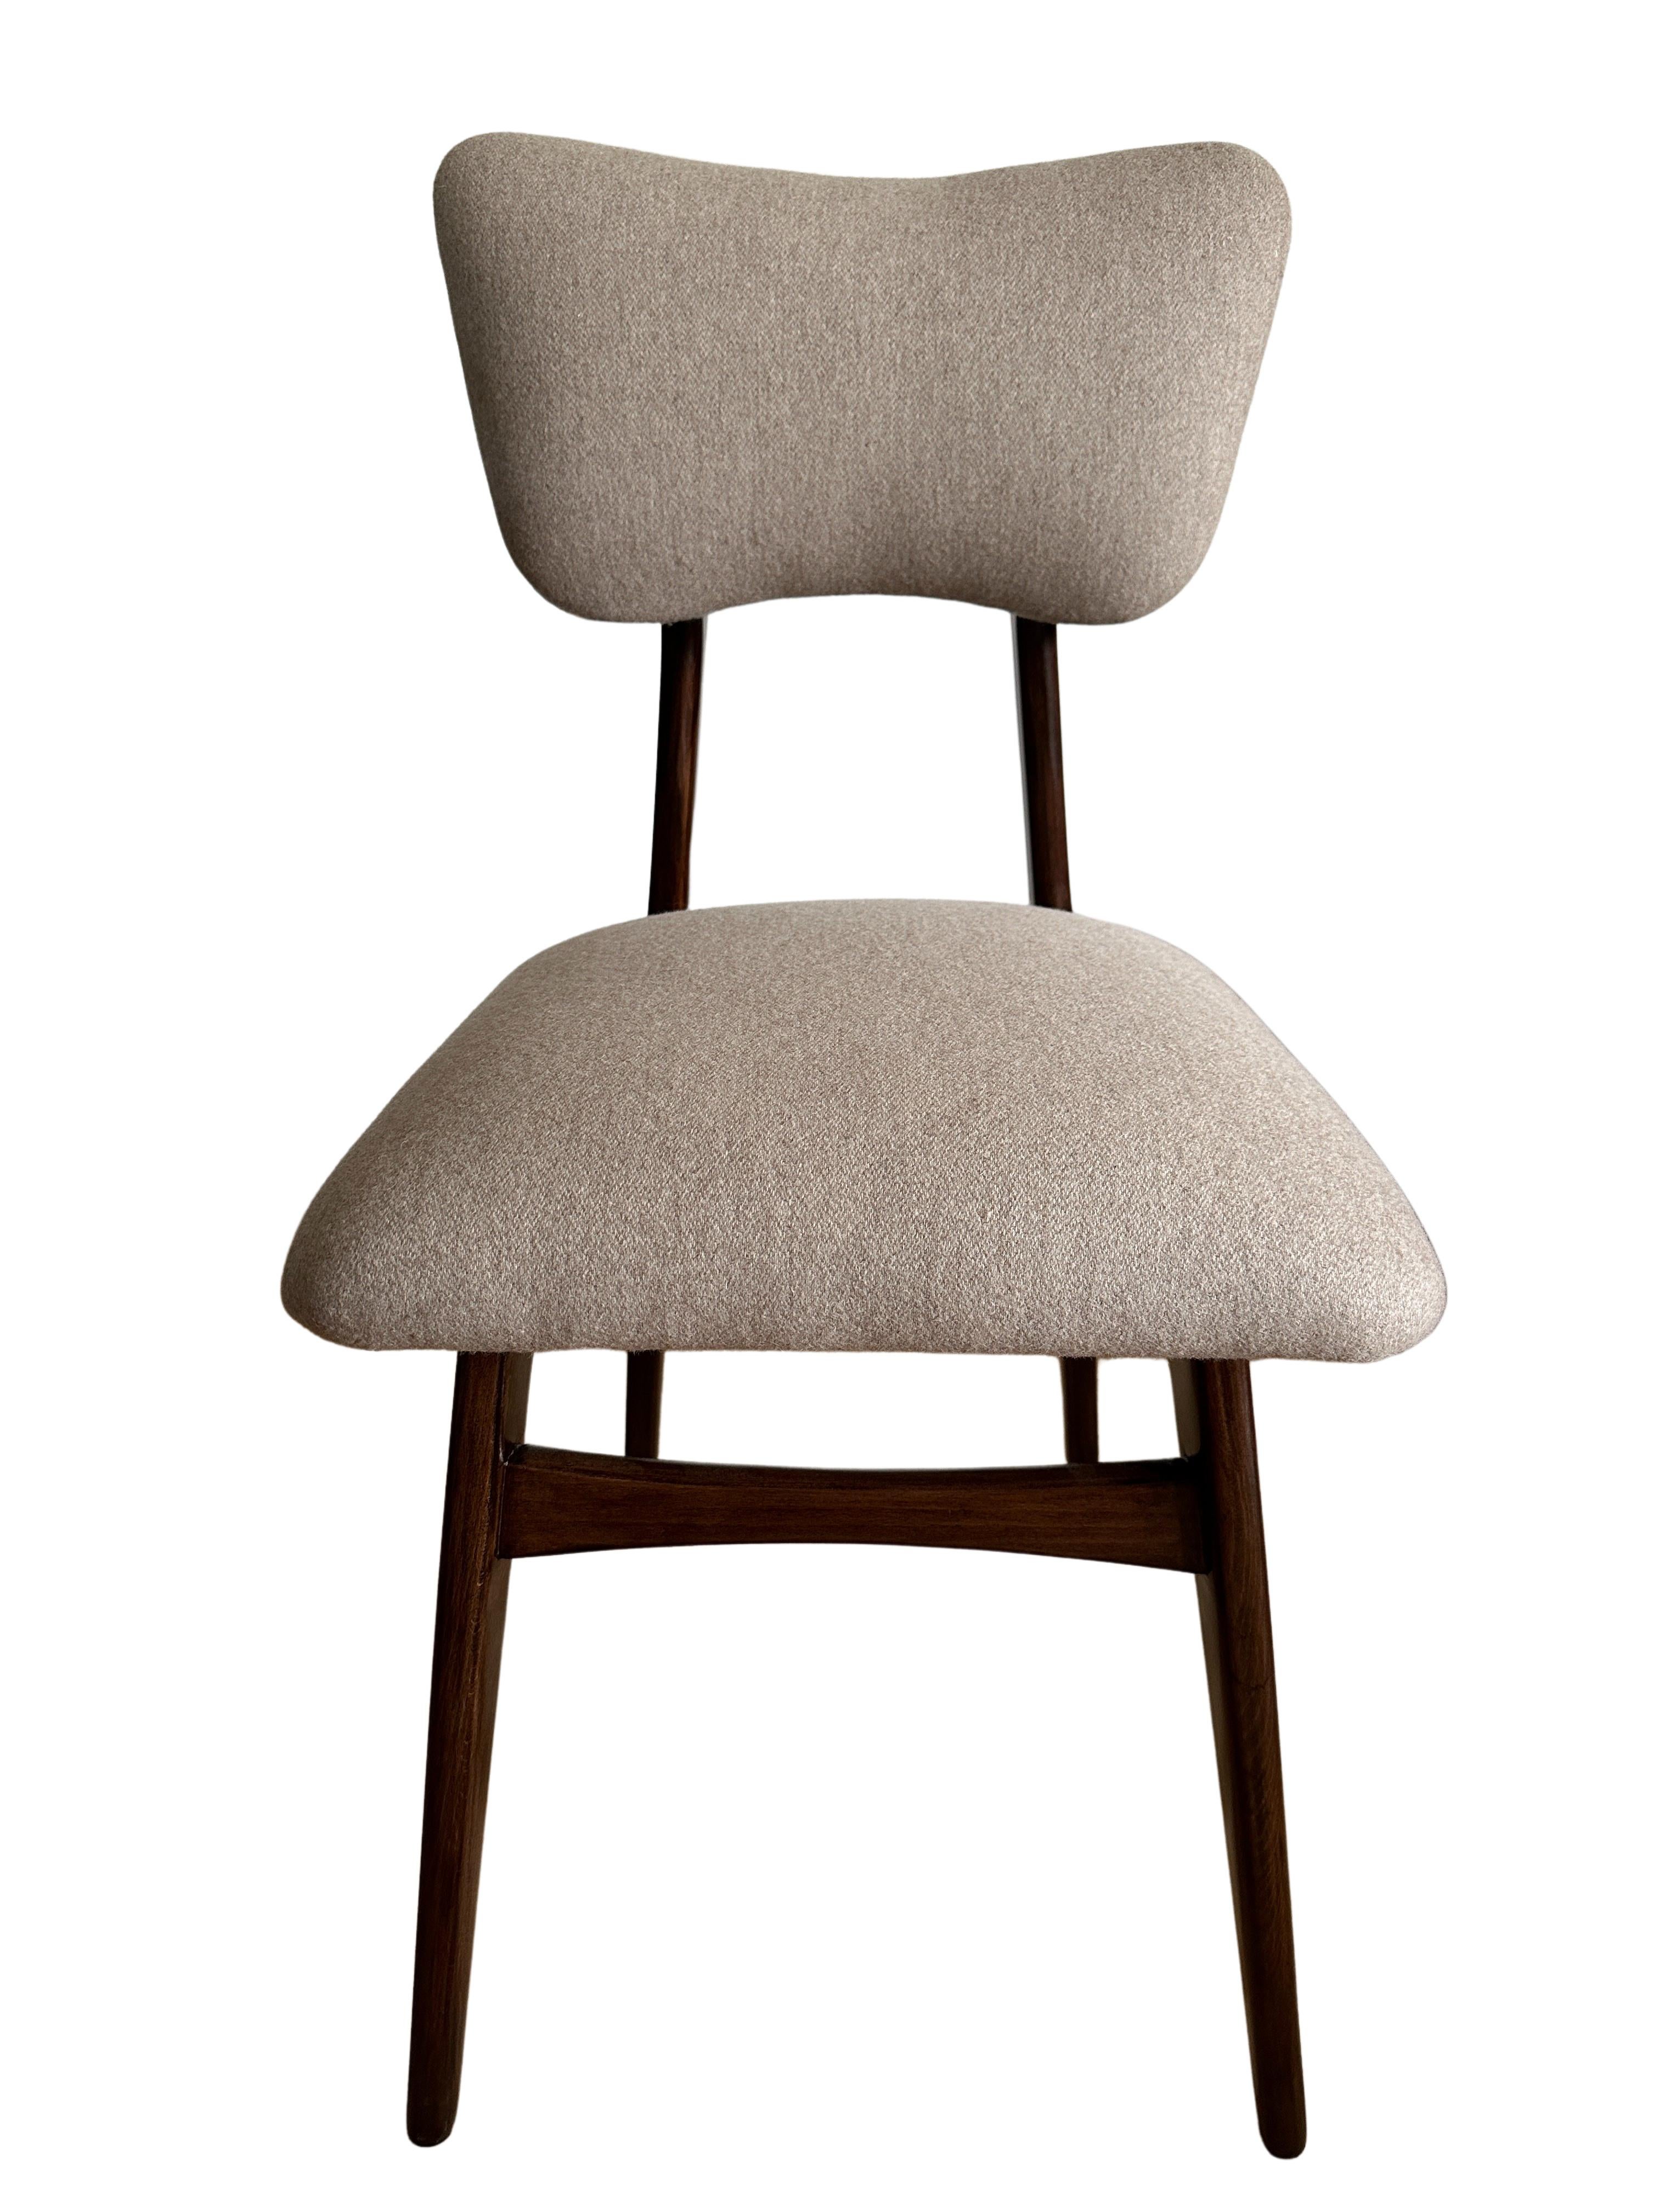 20th Century Set of 6 Midcentury Dining Chairs in Beige Wool Upholstery, Poland, 1960s For Sale